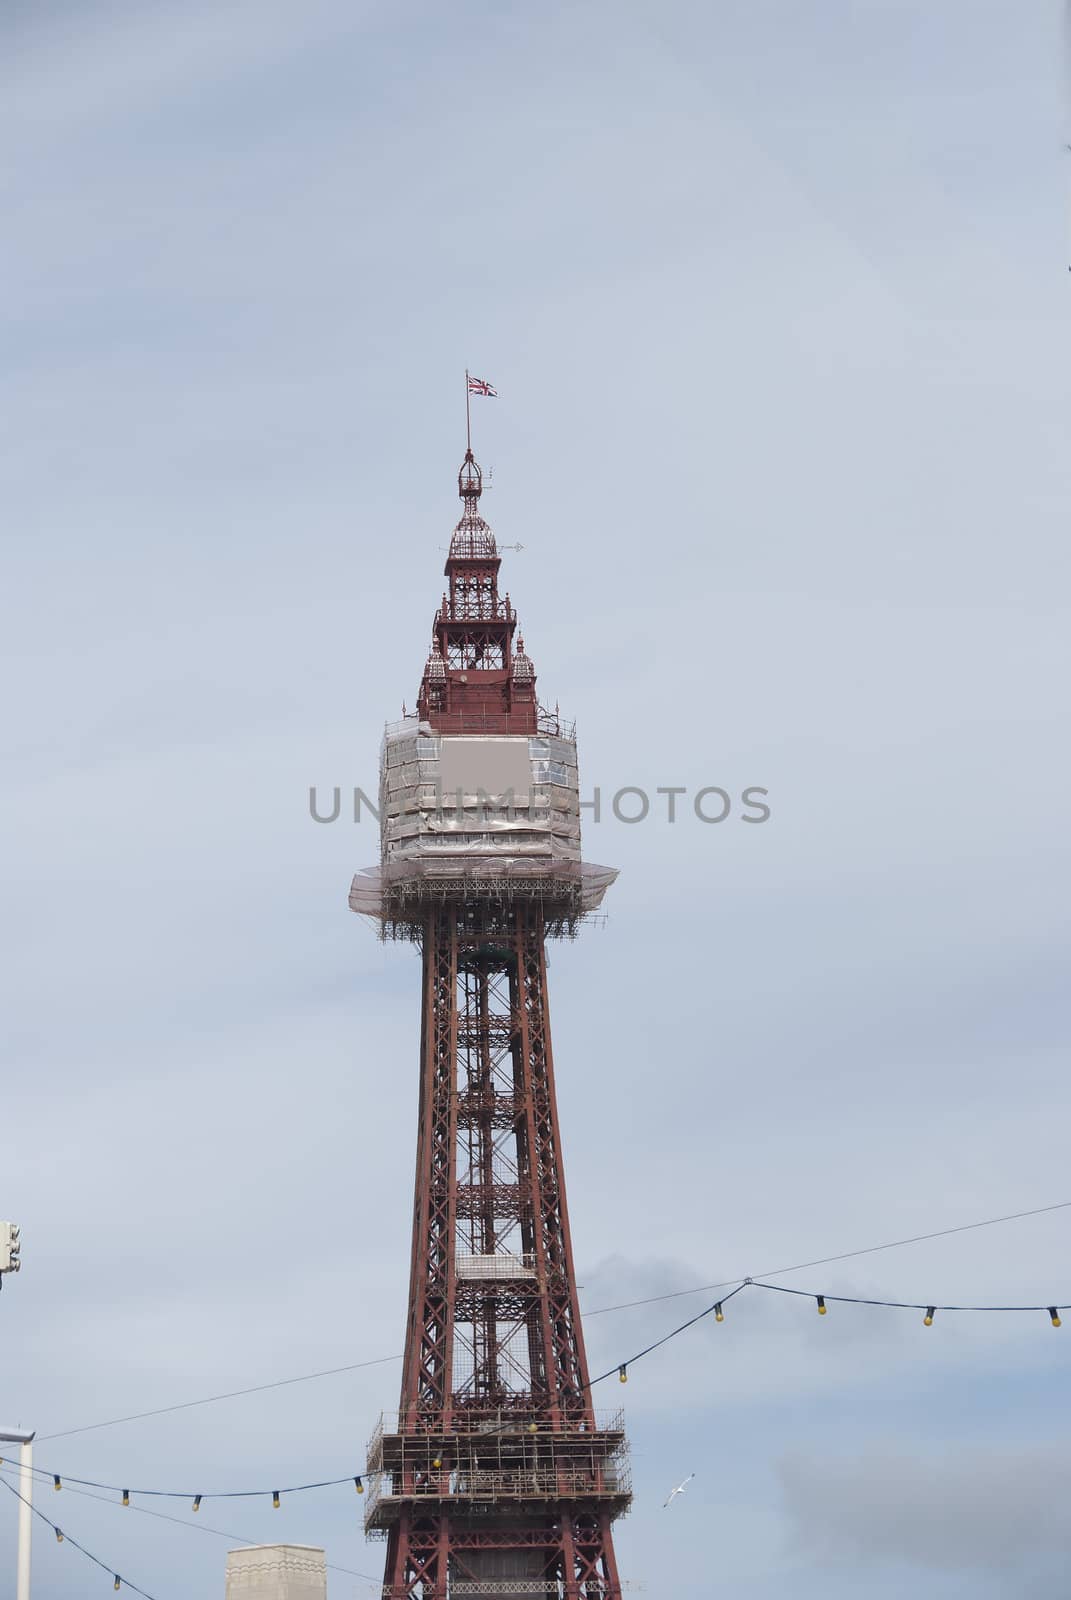 The Famous Tower of Blackpool under a blue sky